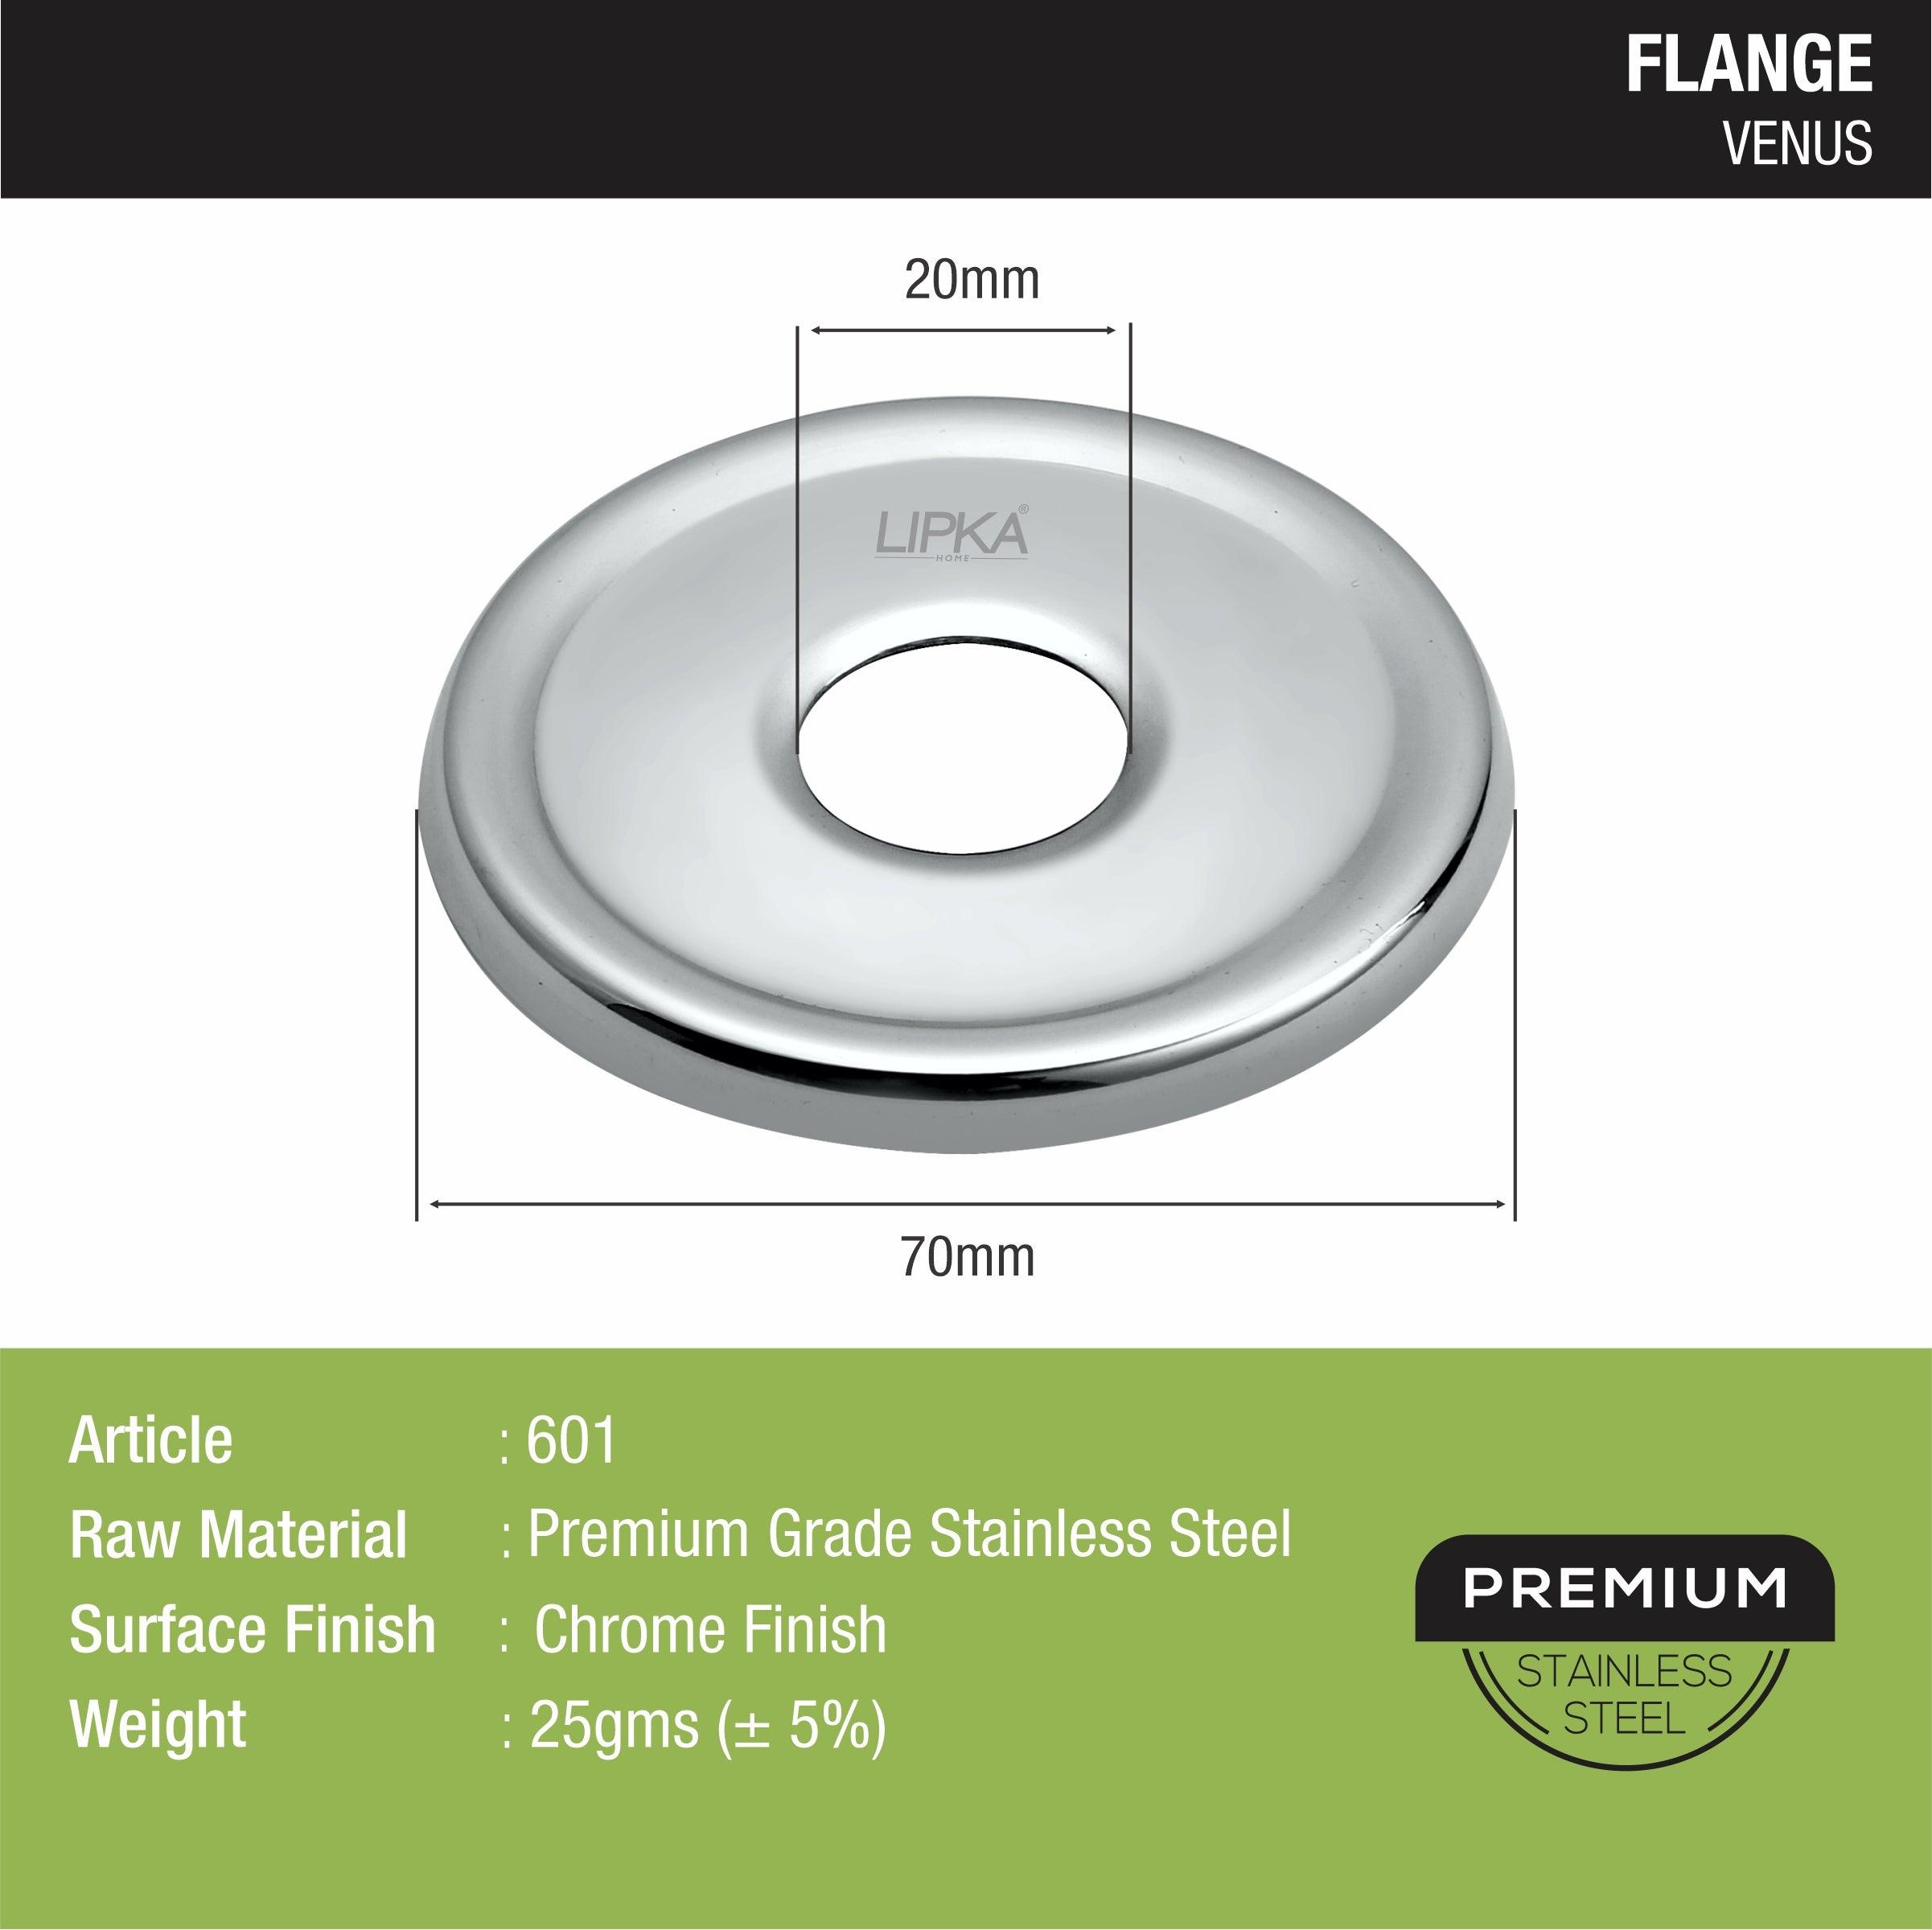 Venus Flange sizes and dimensions